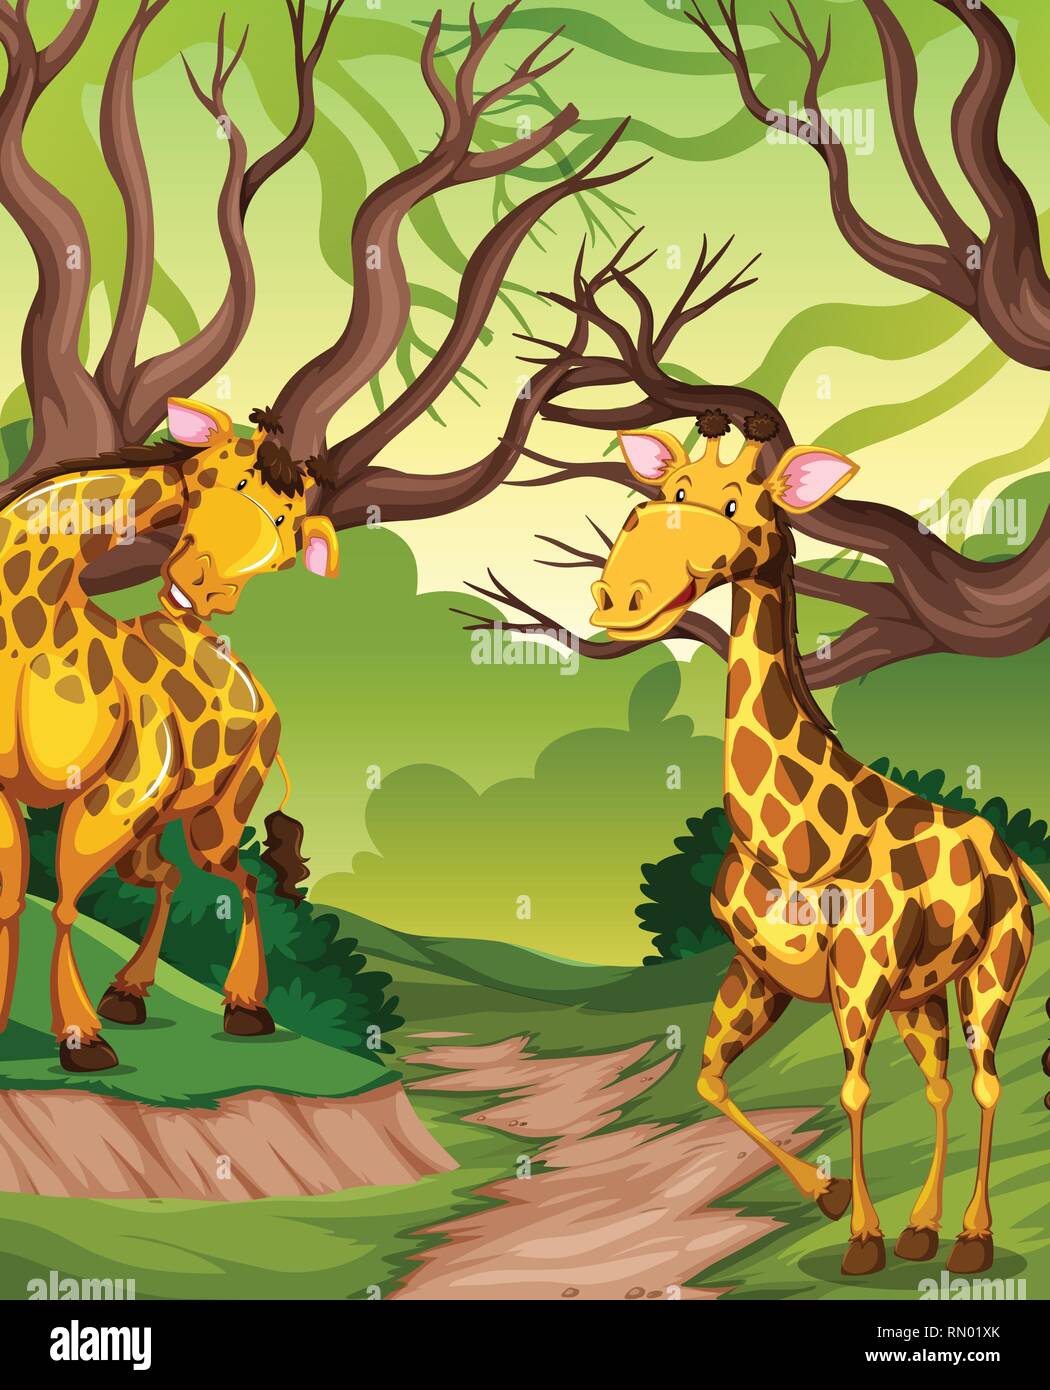 Giraffe with tree Stock Vector Images - Page 3 - Alamy